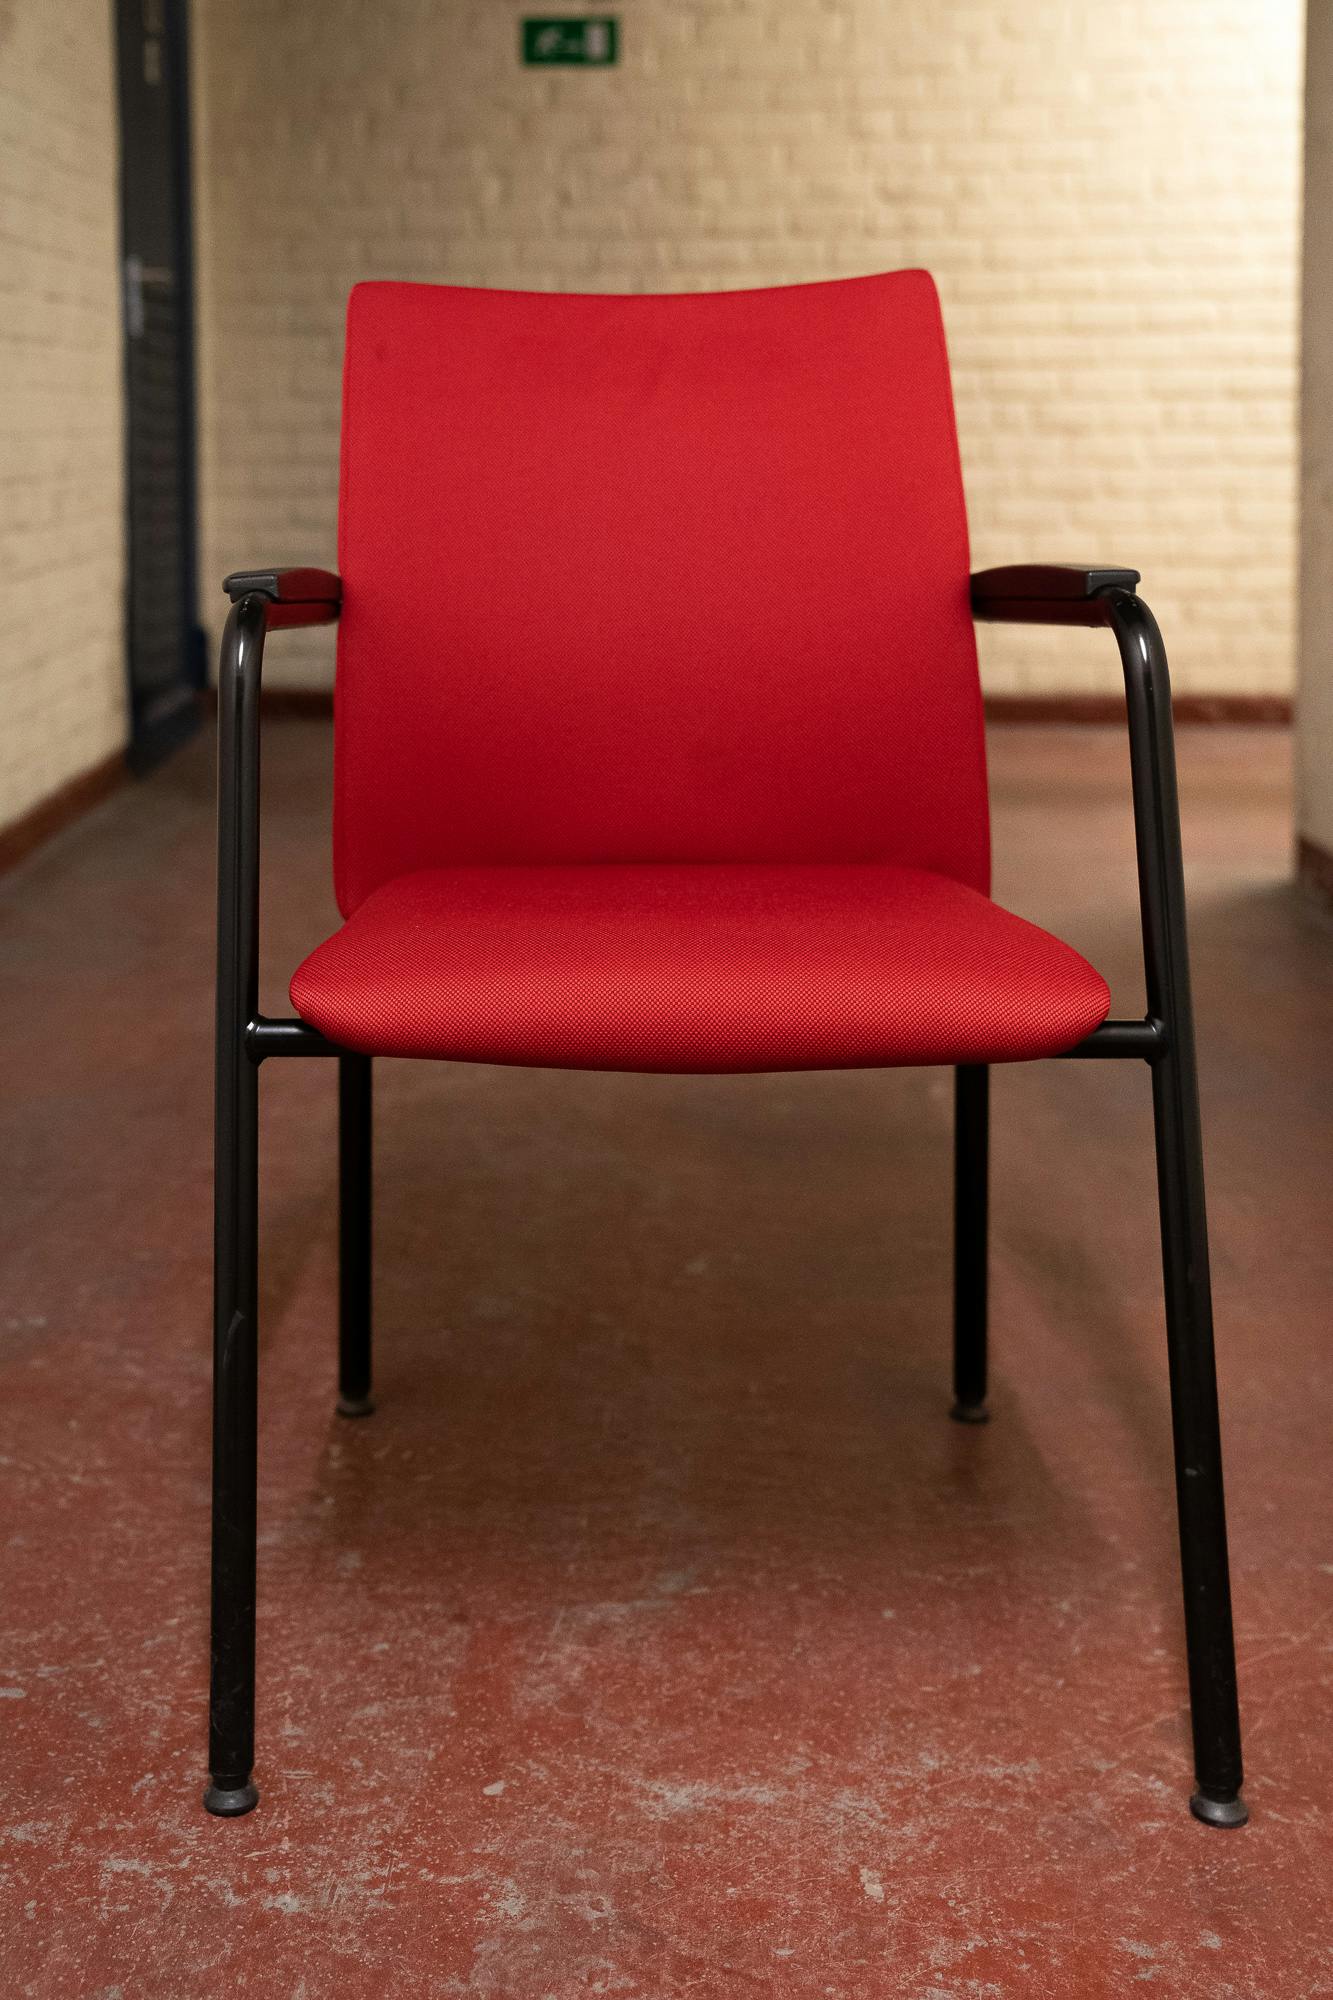 Red stacking chairs - Qualité de seconde main "Chaises" - Relieve Furniture